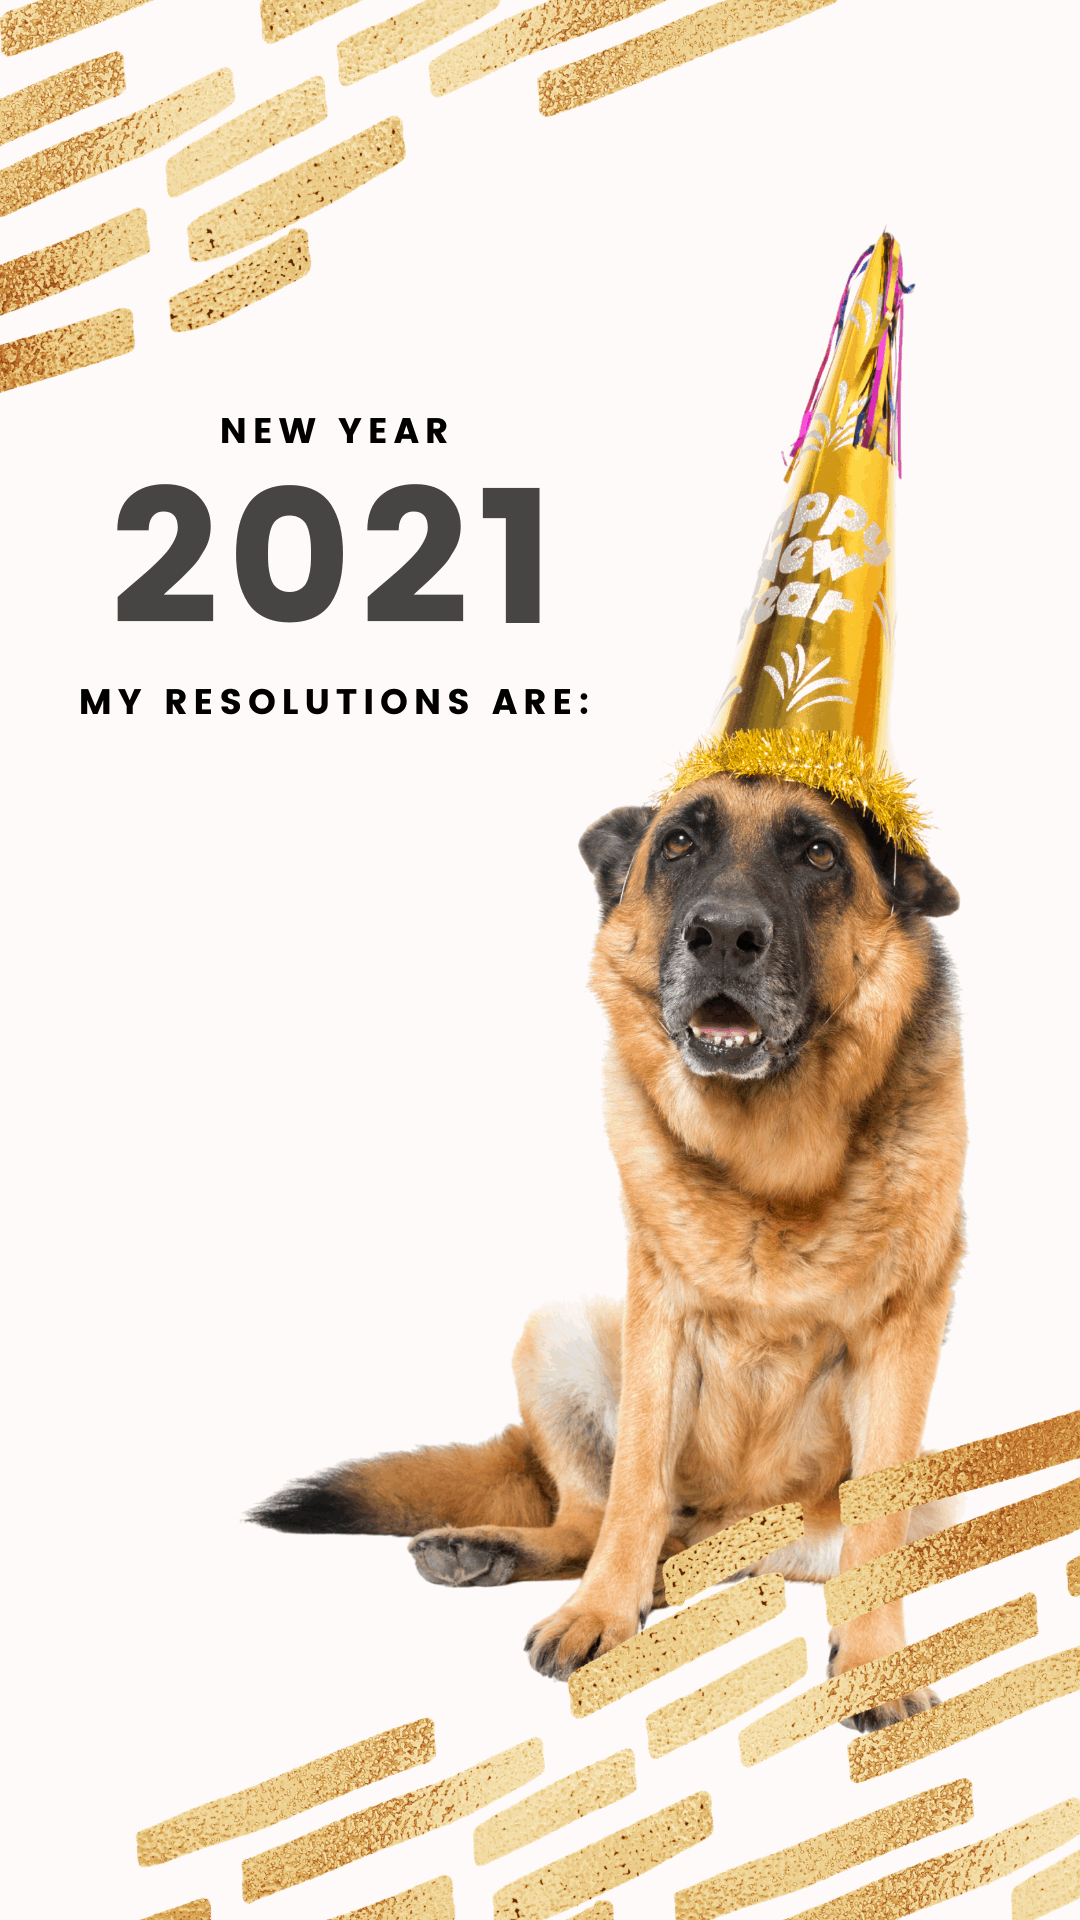 New Years Resolutions 2021